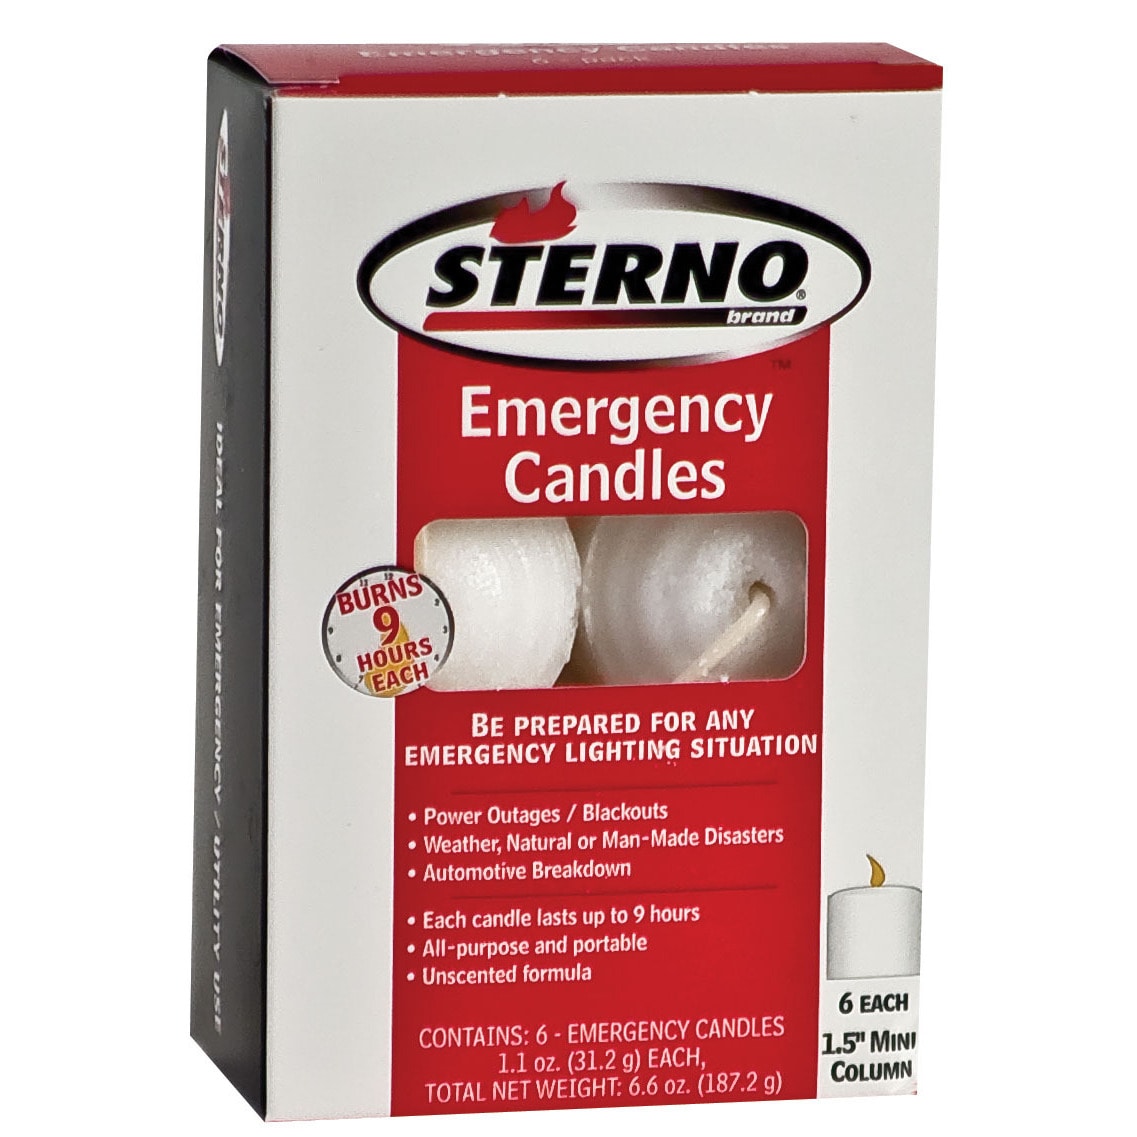 Sterno 40258 Mini Emergency Candles 6 Count - Bed Bath & Beyond - 12923020